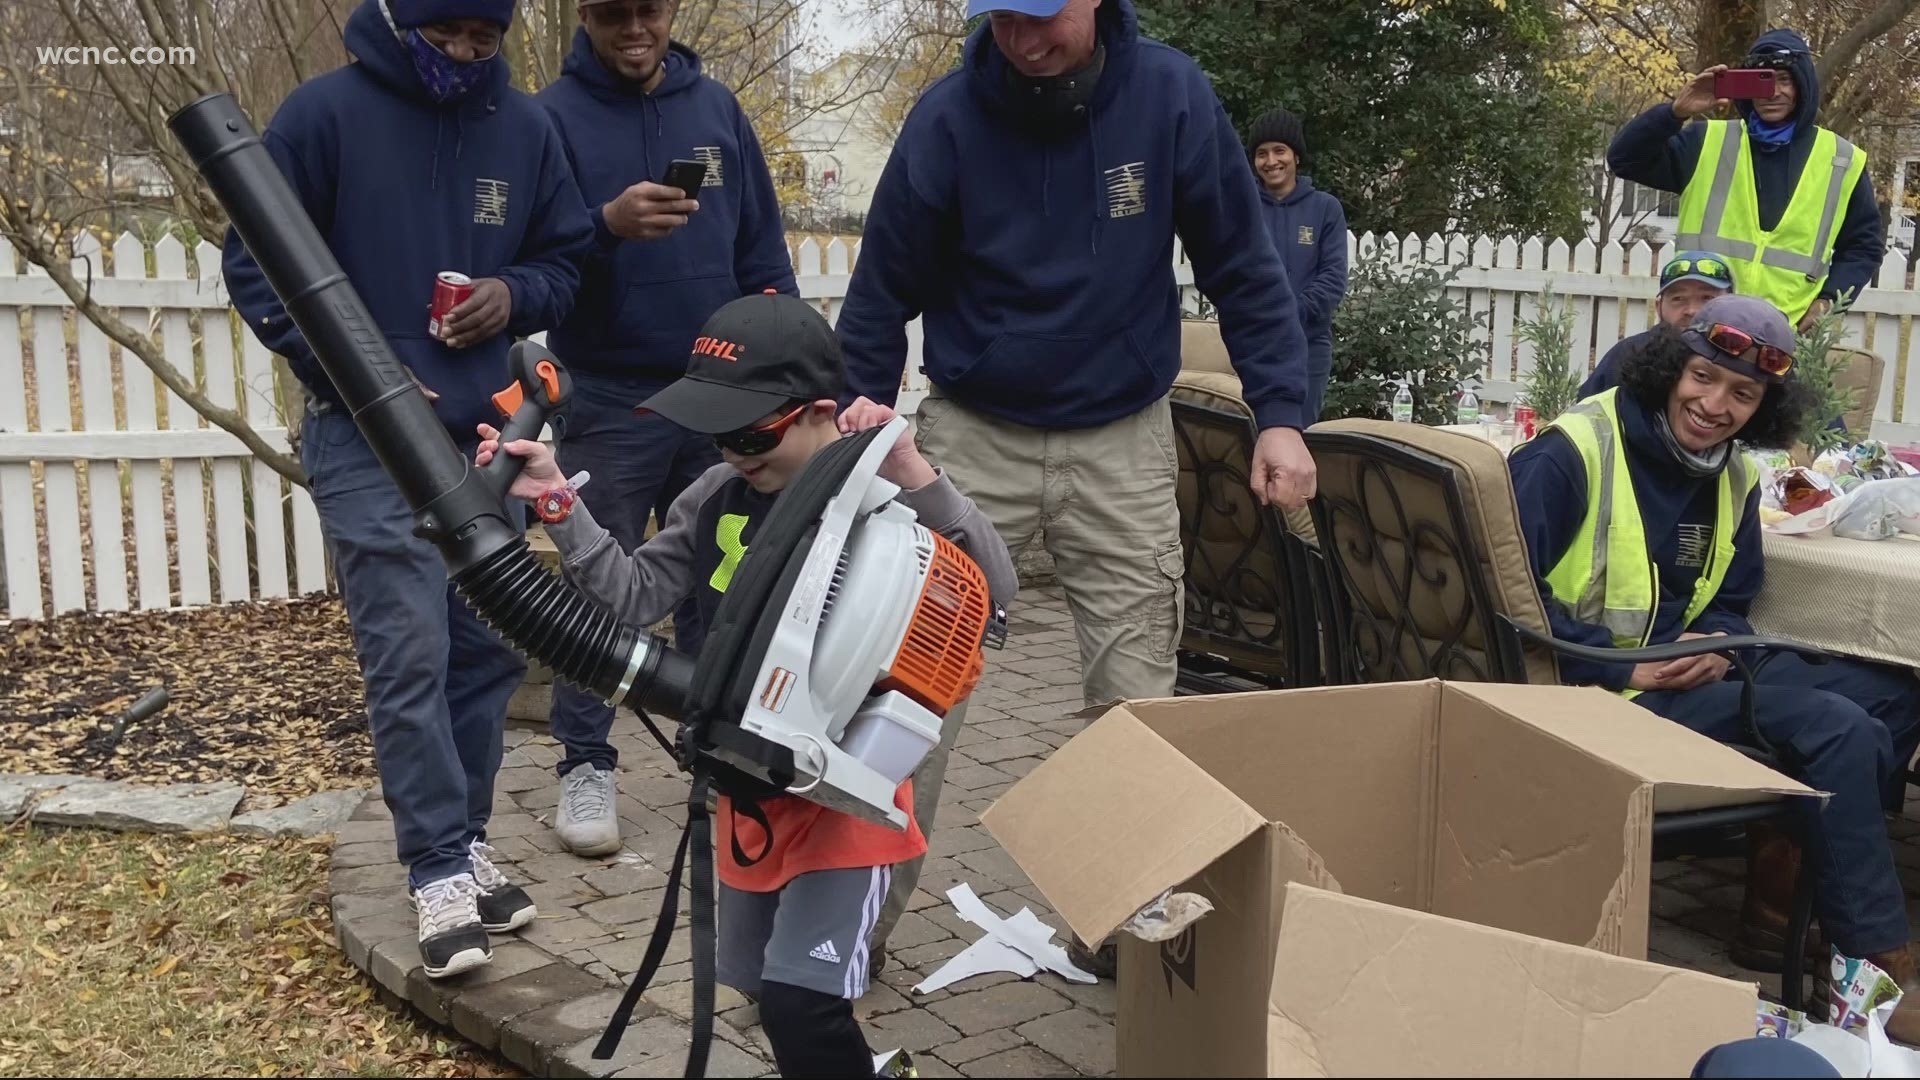 U.S. Lawns Charlotte gave James Schrafft a leaf blower of his own after helping the crew with several jobs in his neighborhood this past fall.